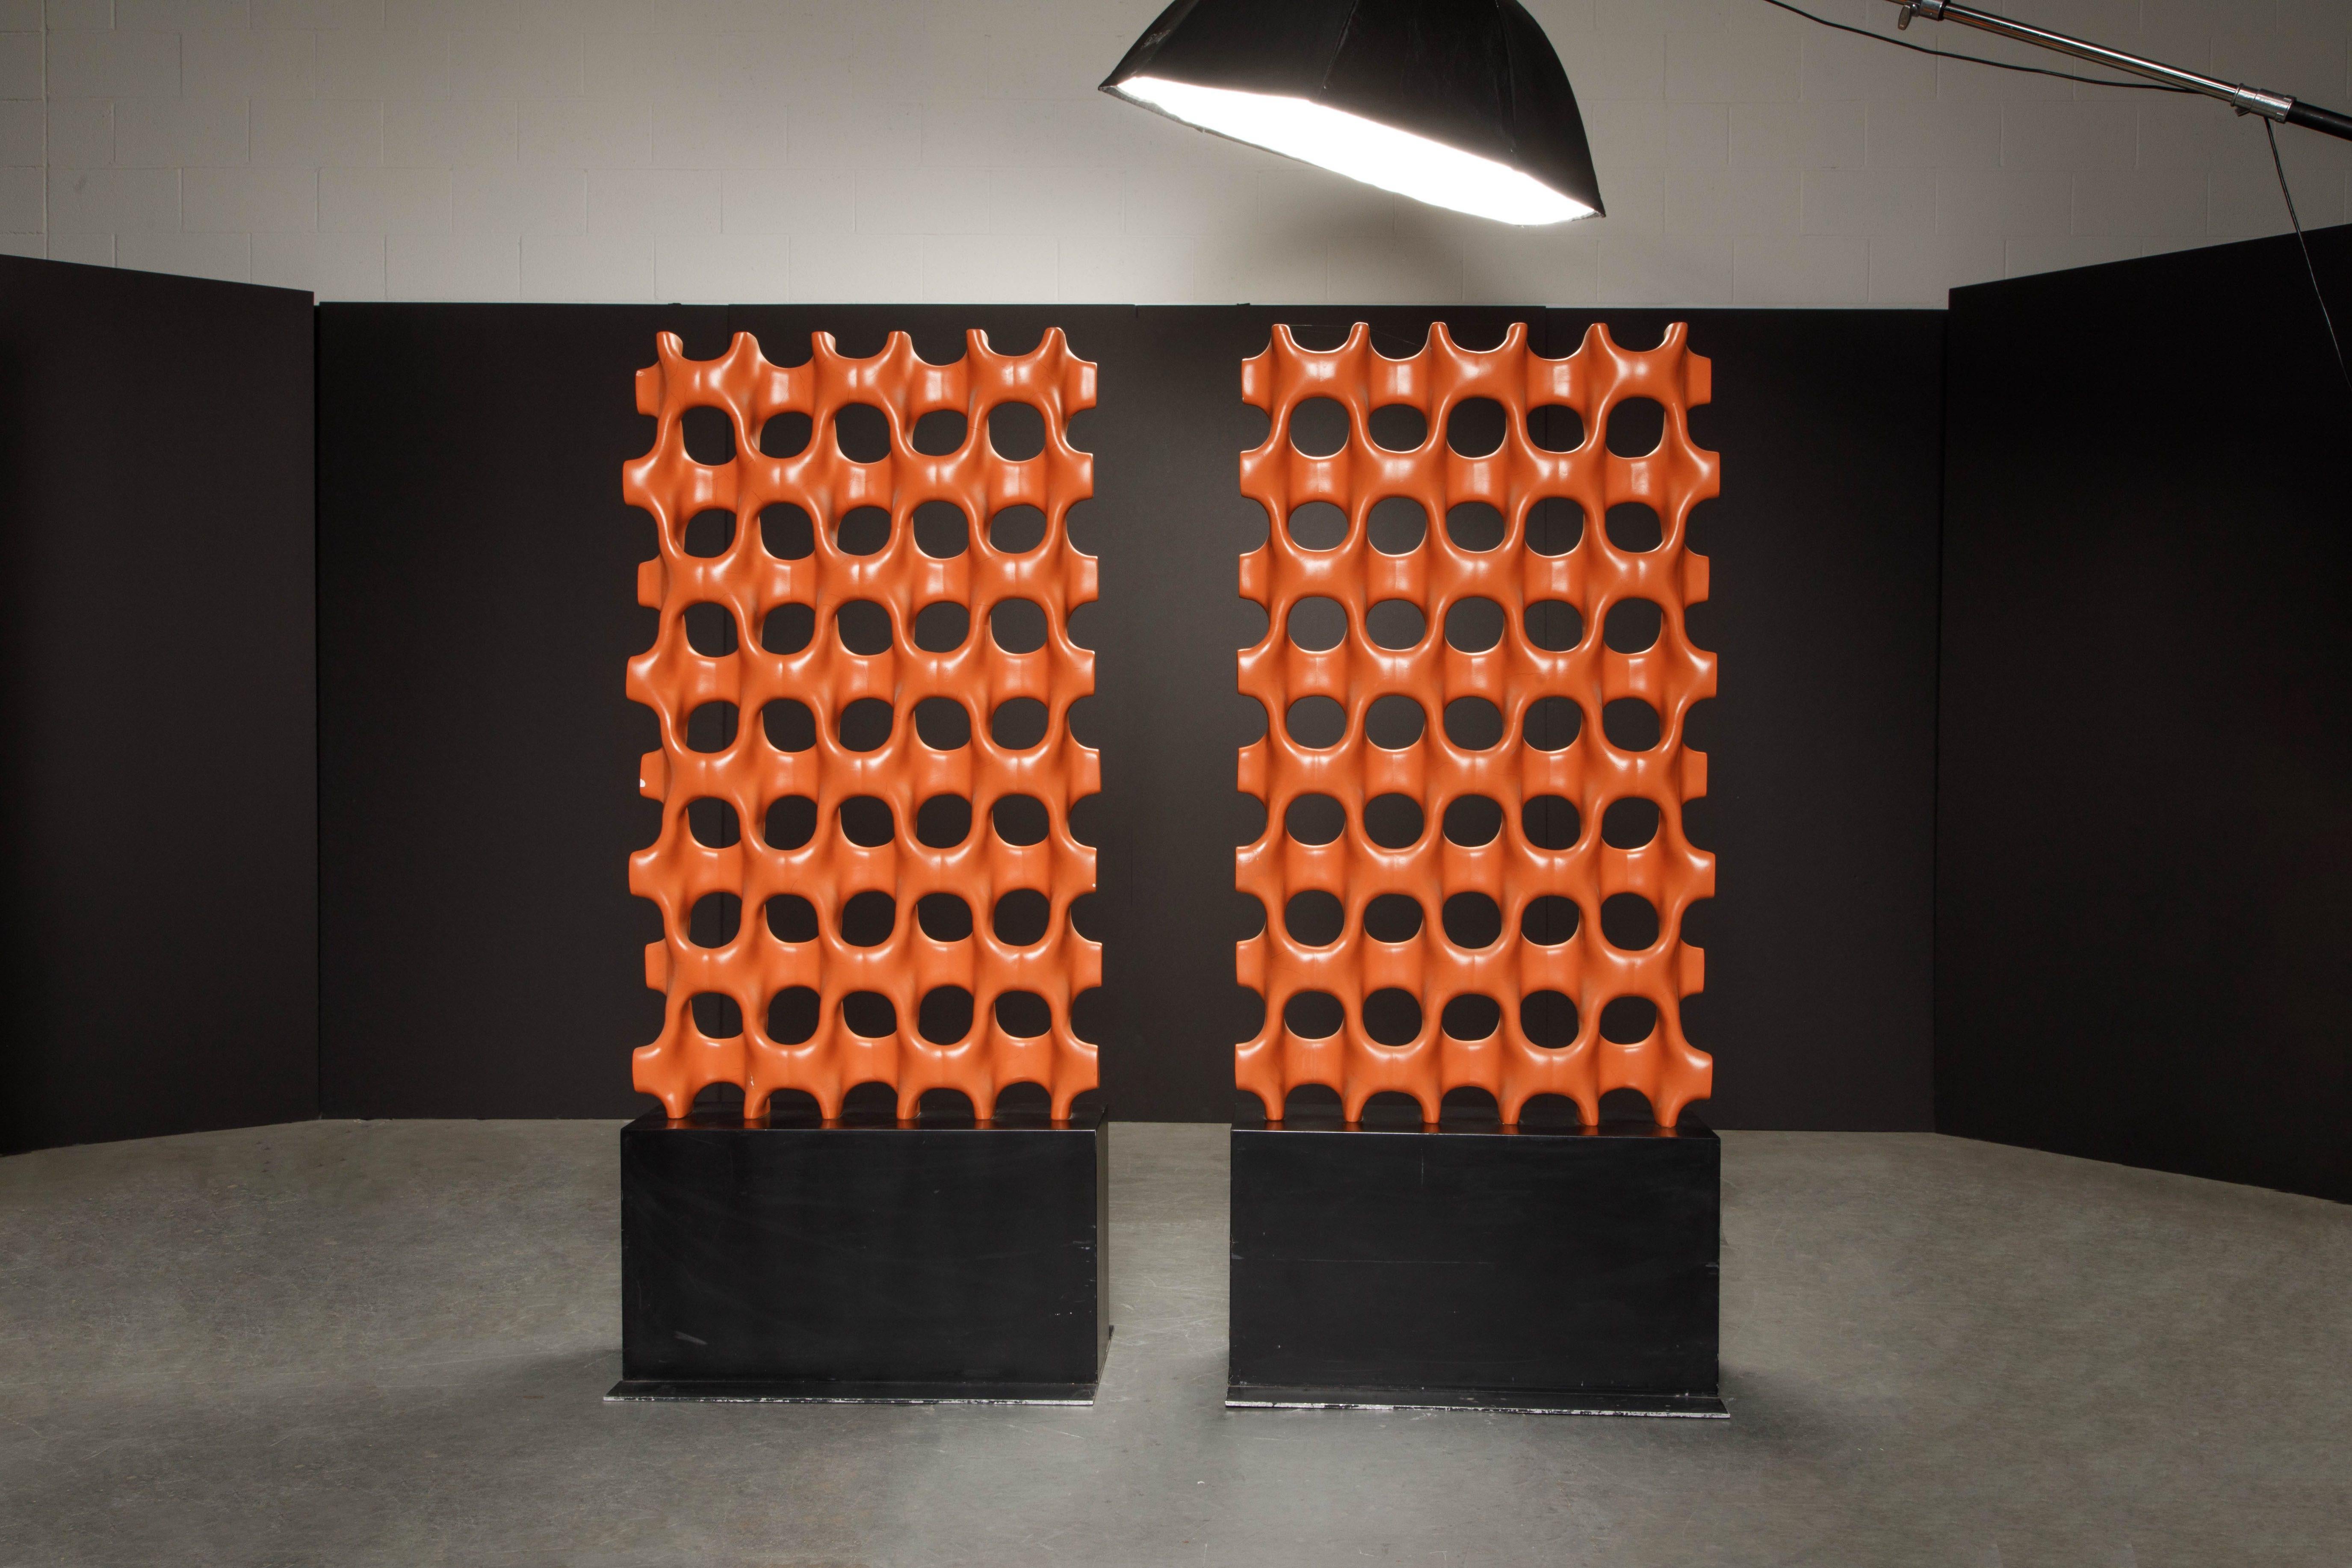 This freestanding model C-20 Sculpta-Grille room divider by Richard Harvey for Harvey Design Workshop, Inc was conceptualized and designed in the 1950s and finally released to the public in 1959 as a line of injection molded architectural screens